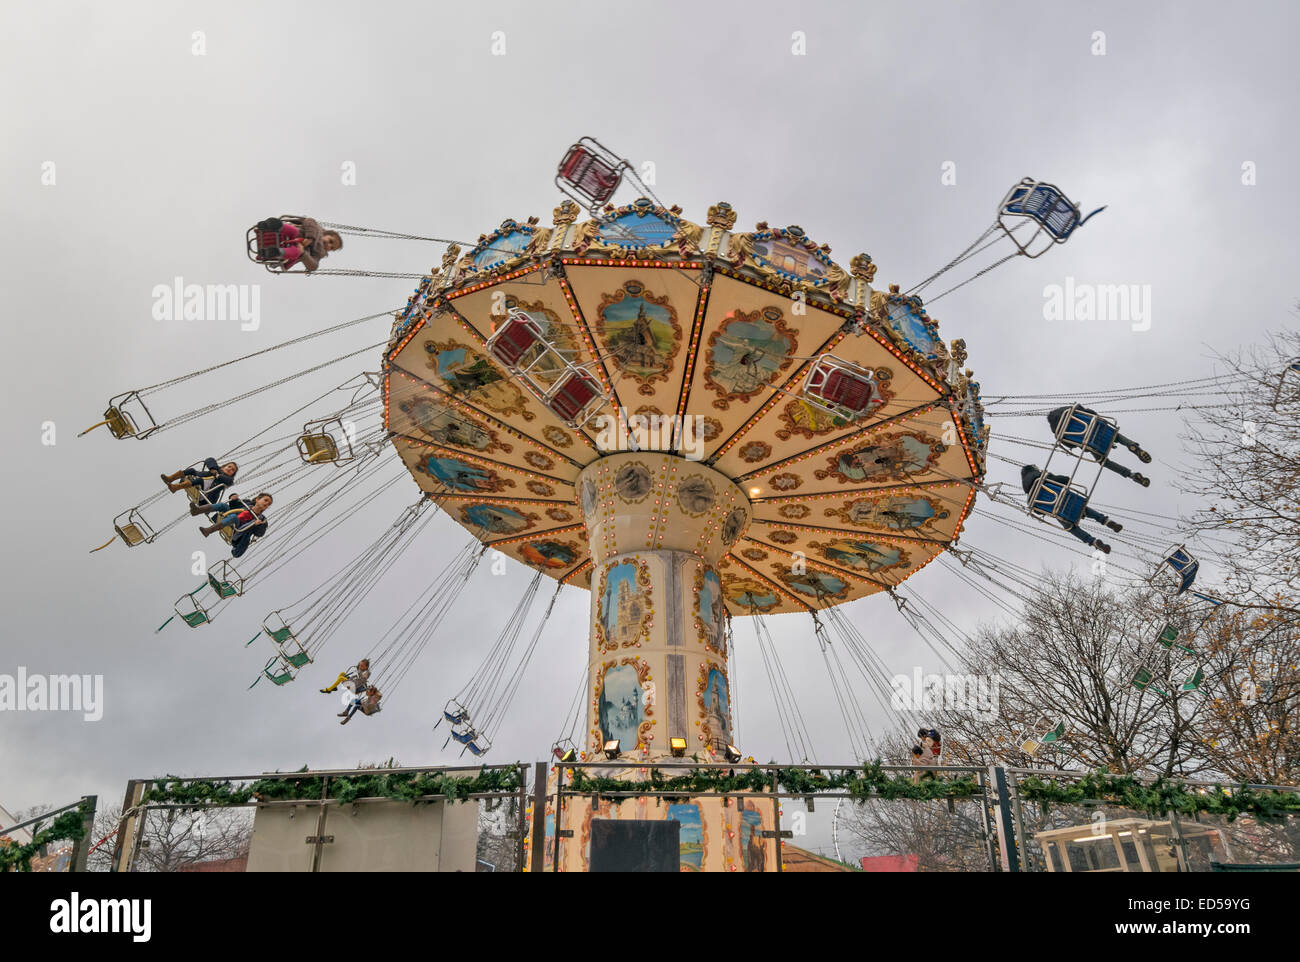 LONDON HYDE PARK WINTER WONDERLAND A SPINNING CAROUSEL  OR MERRY GO ROUND WITH PASSENGERS FLYING ROUND ON THE CHAIRS Stock Photo